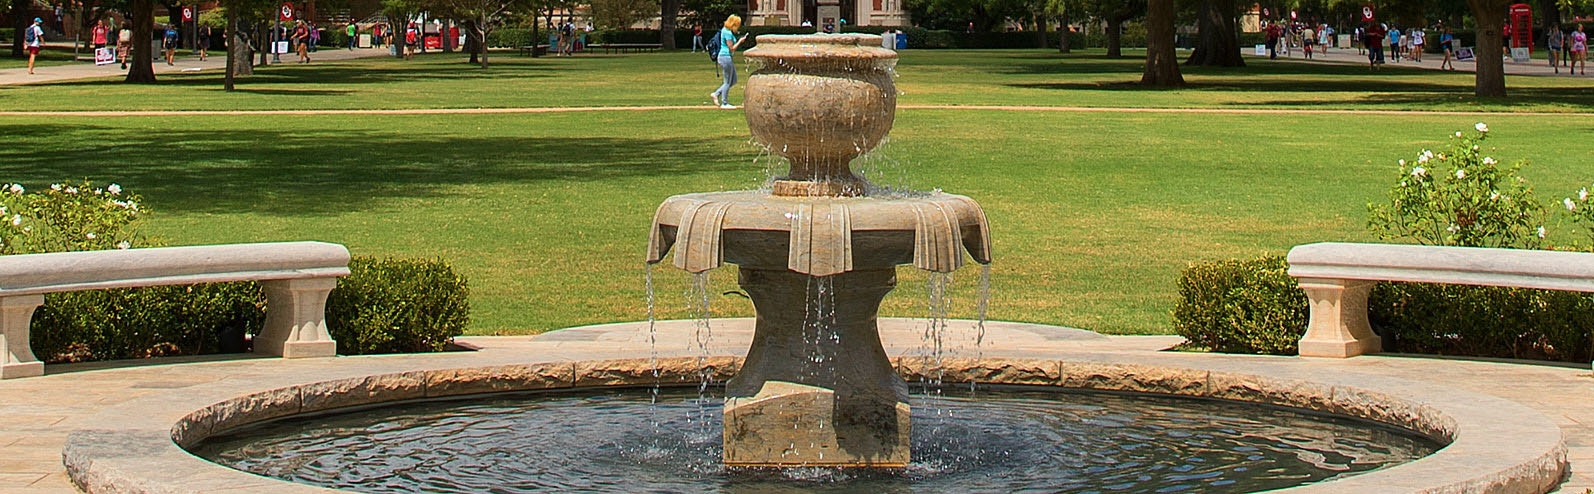 Photo of a fountain in the south oval located in the OU Norman campus.